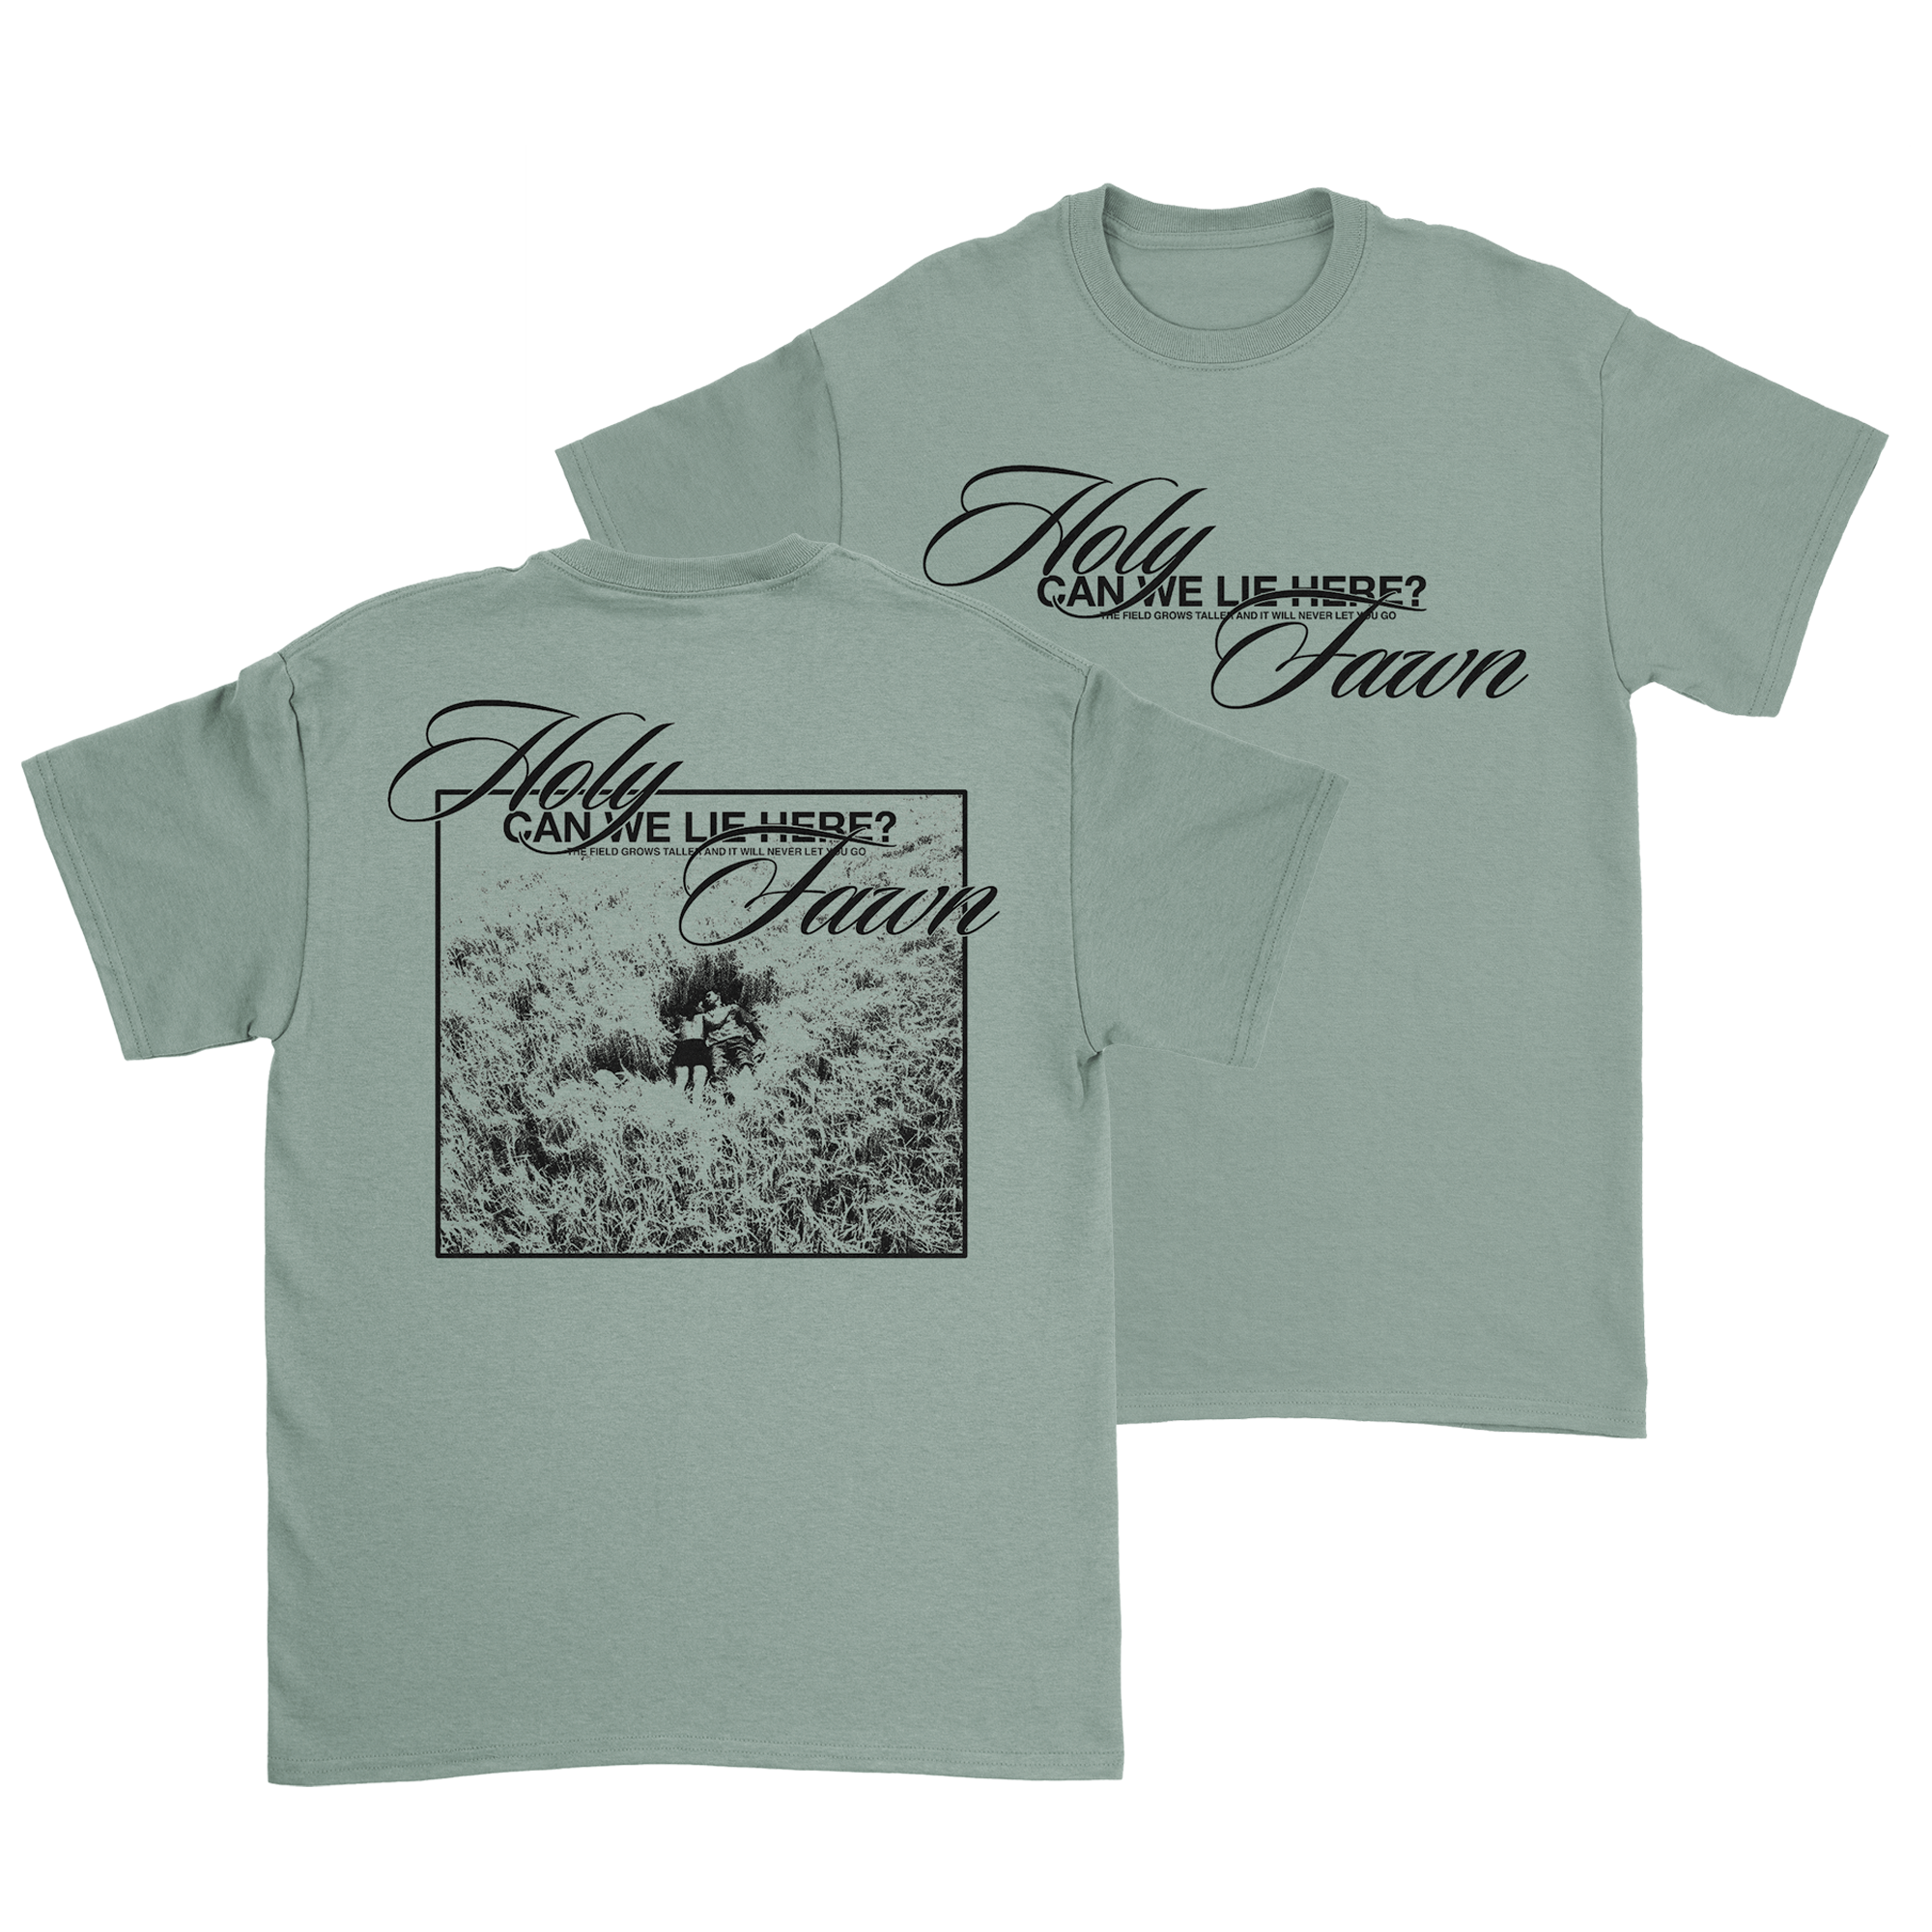 Holy Fawn - Can We Lie Here T-Shirt (Pre-Order)